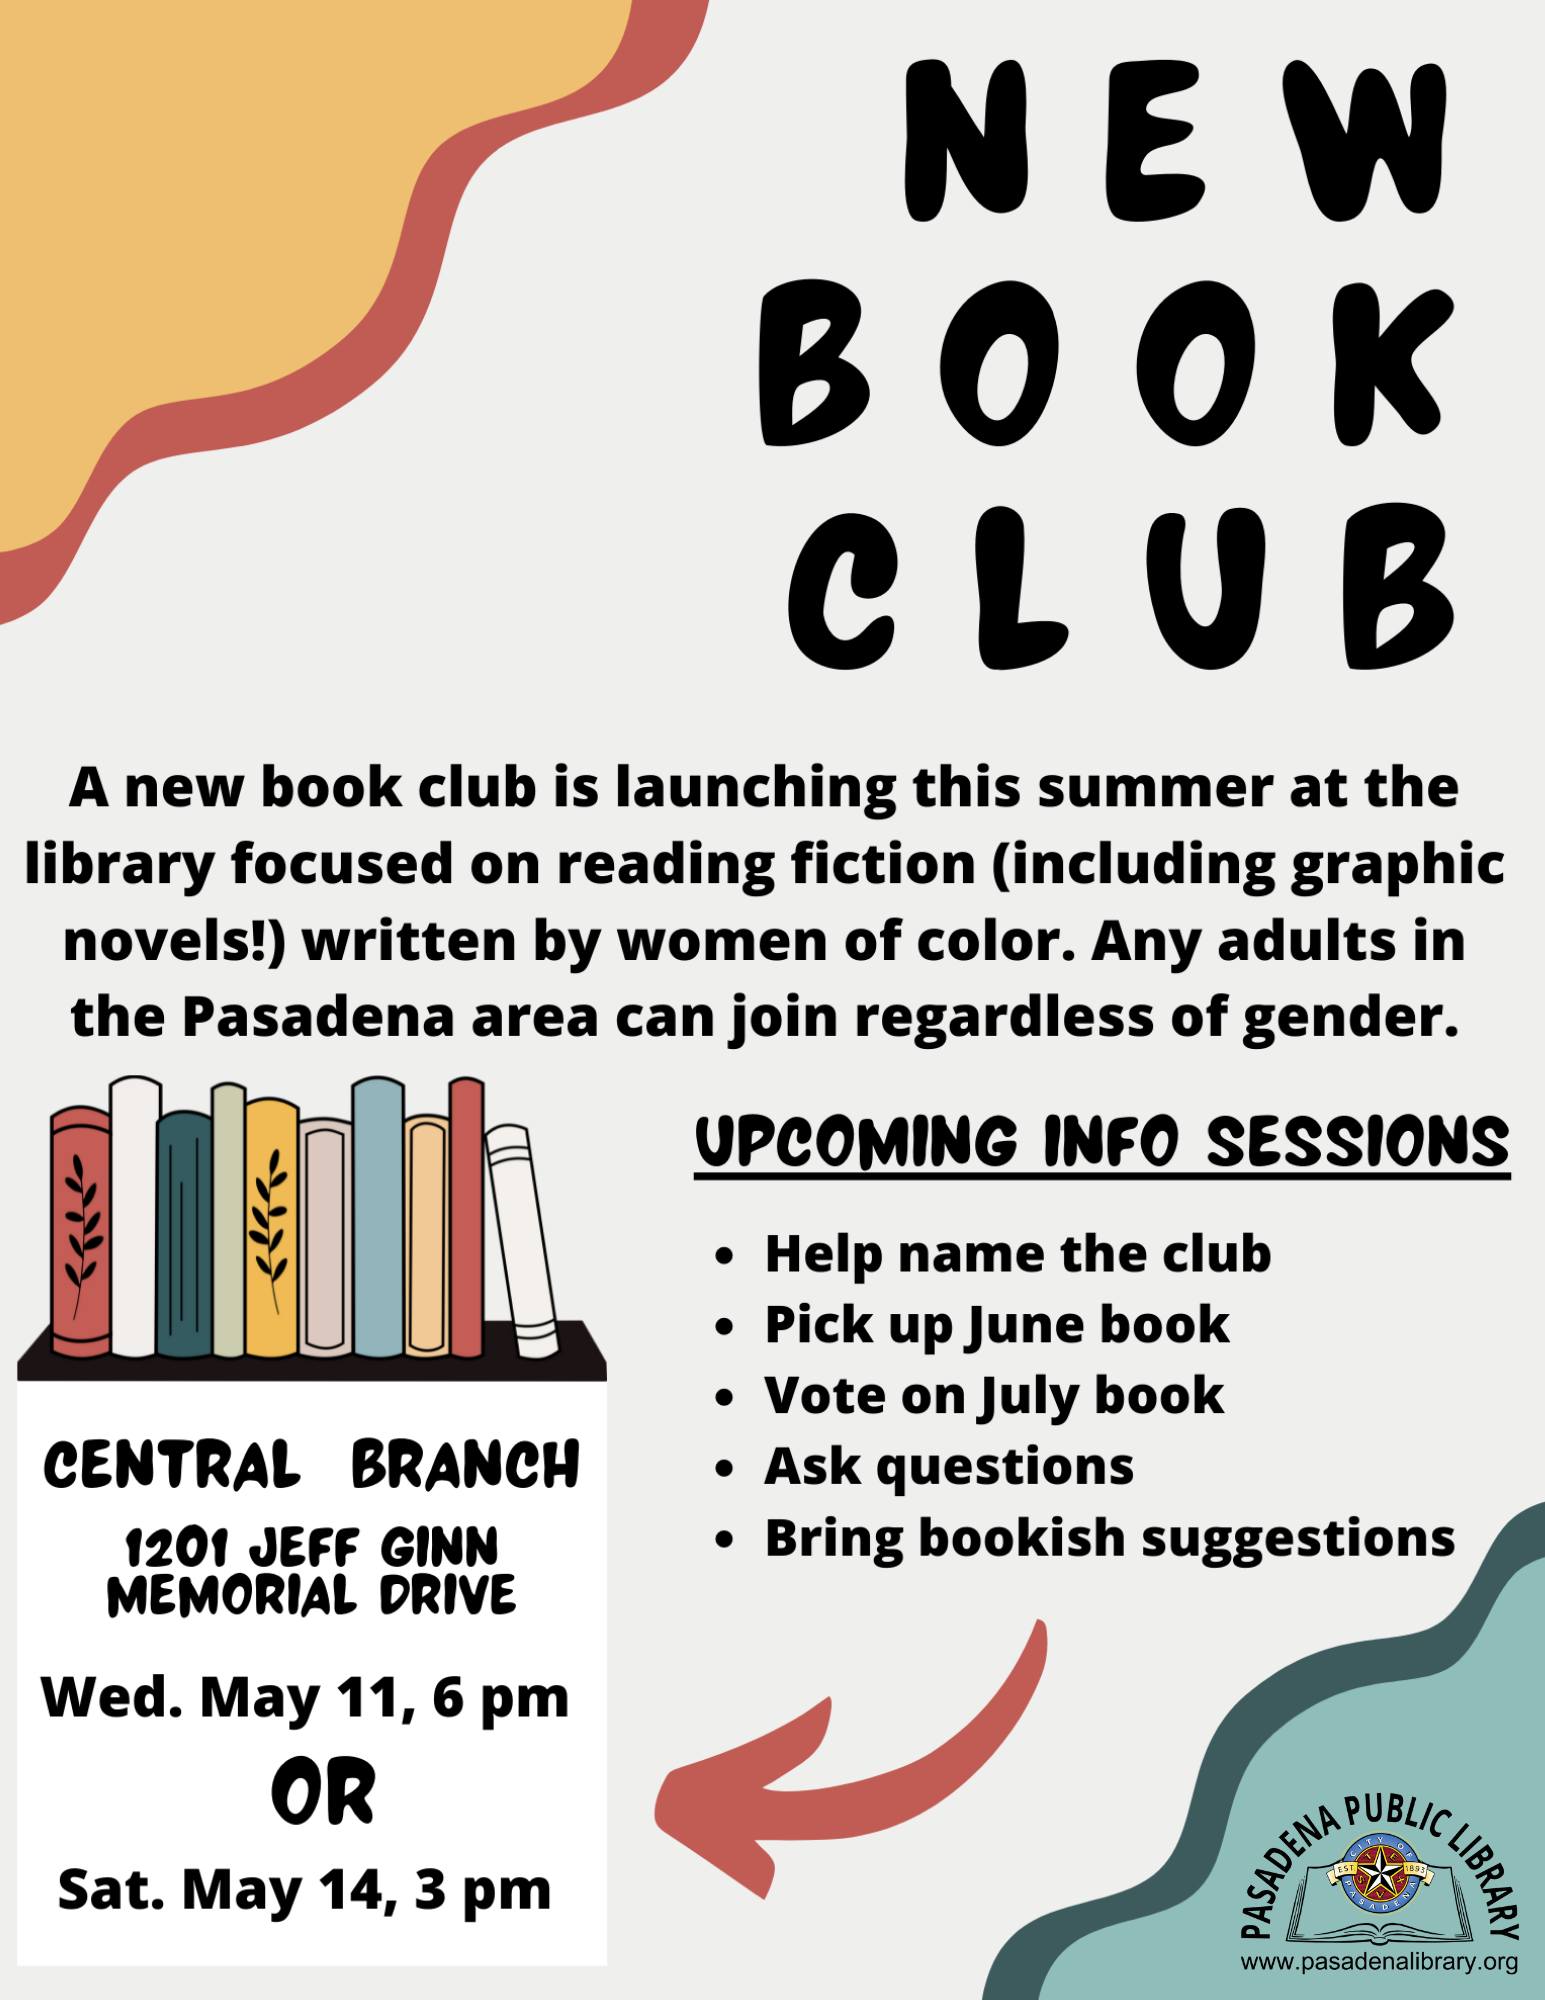 A new book club is launching this summer at the library focused on reading fiction (including graphic novels!) written by women of color. Any adults in the Pasadena area can join regardless of gender.